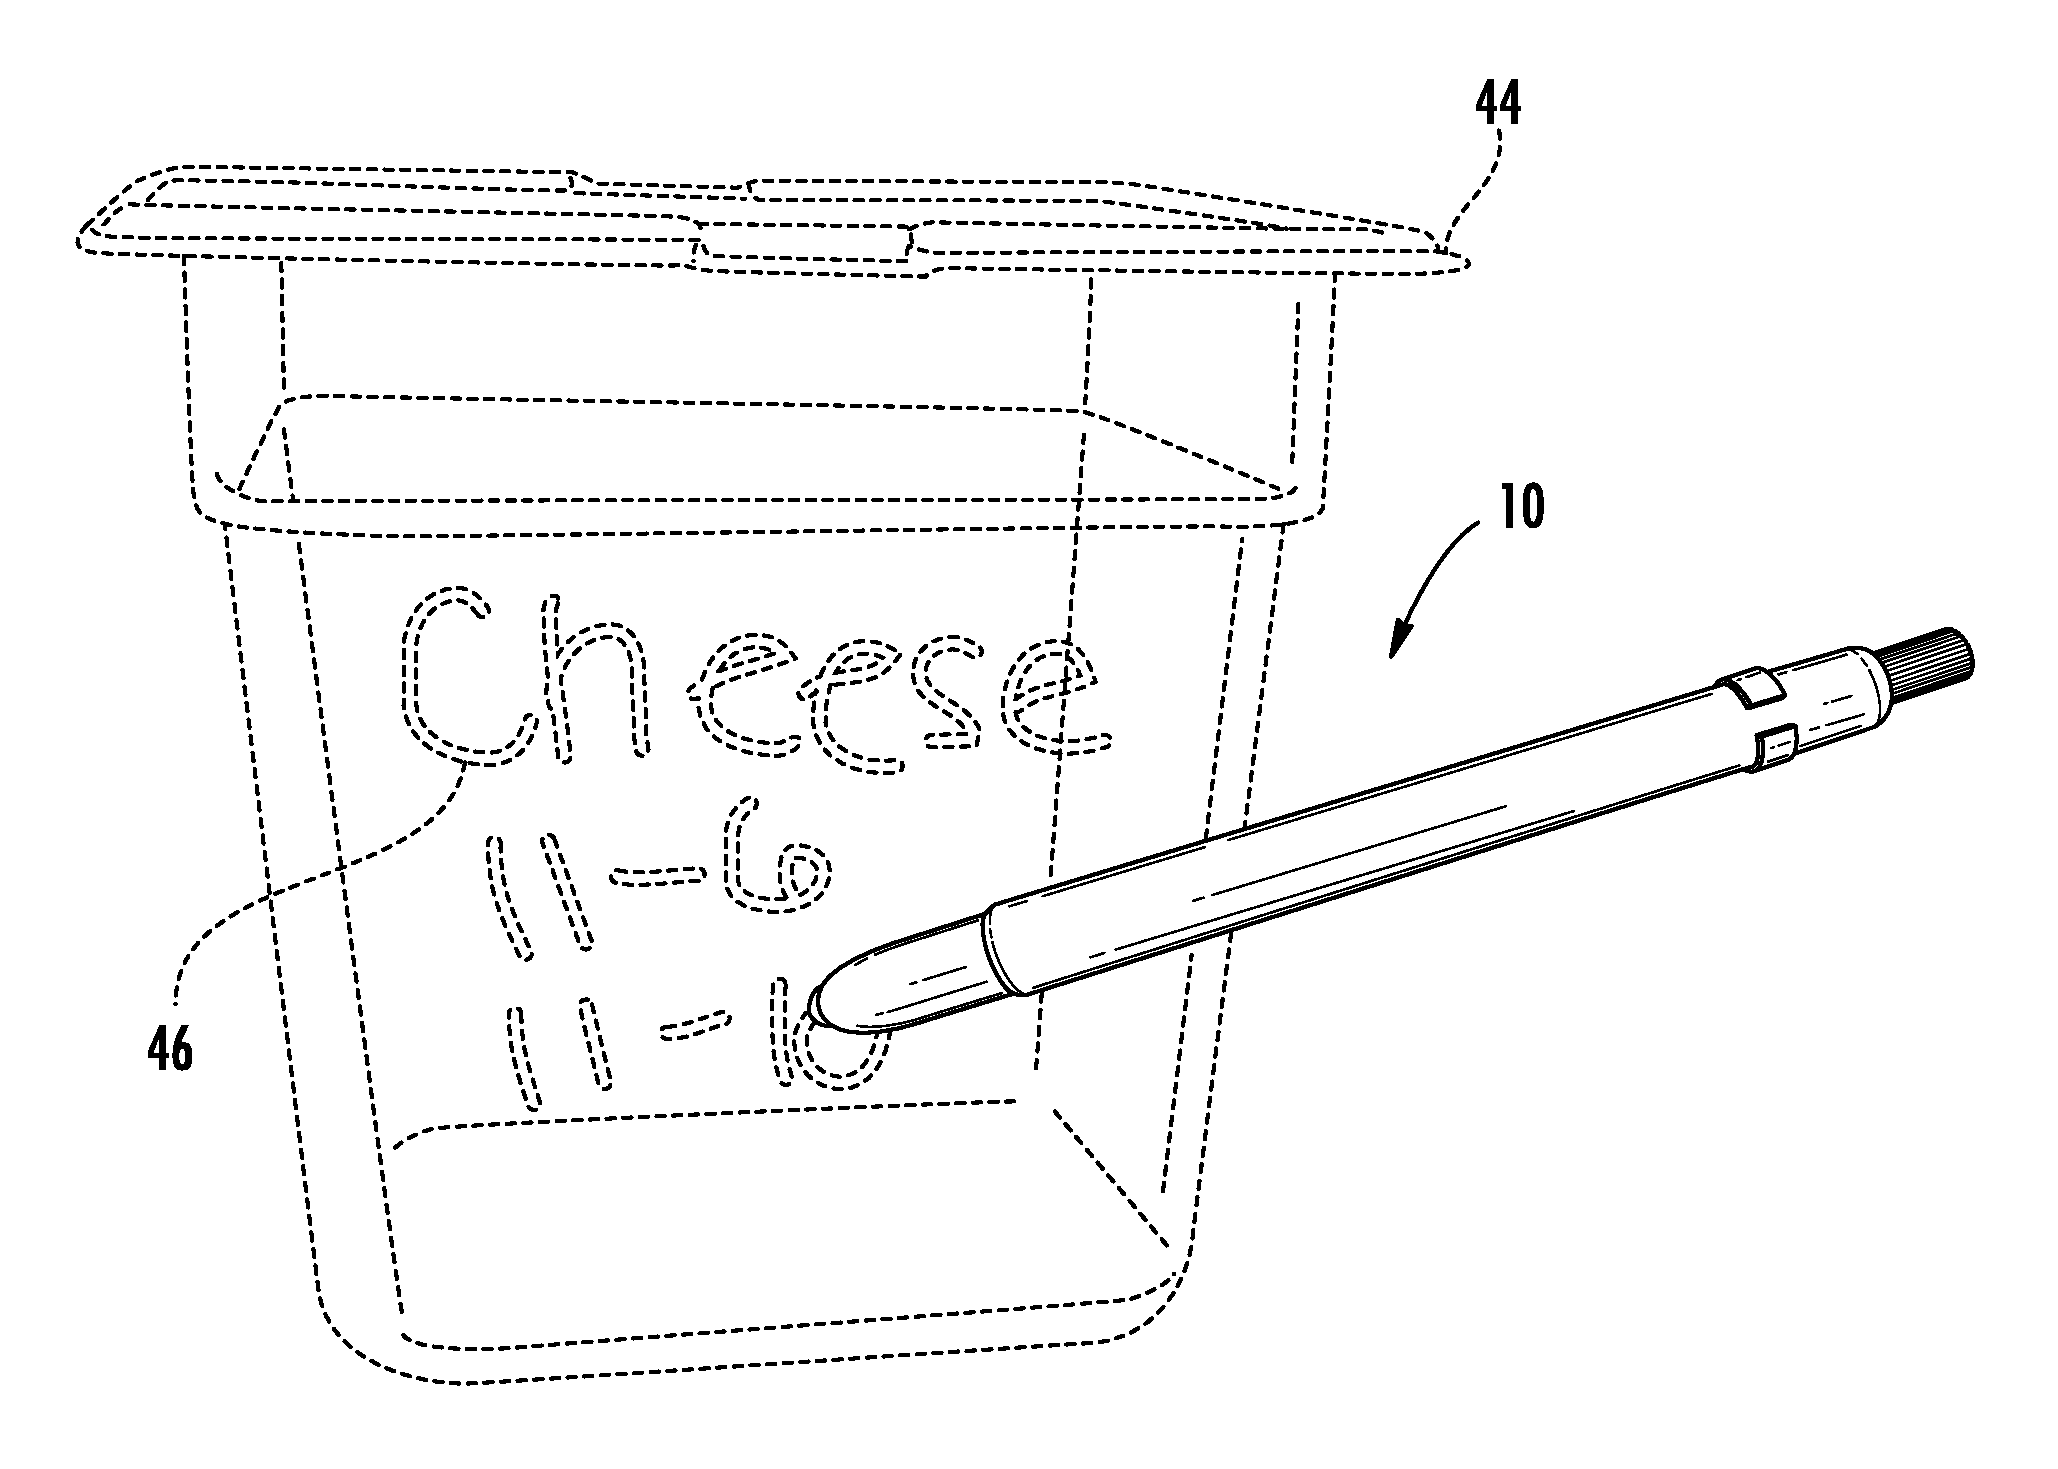 Writing instrument for labeling food containers